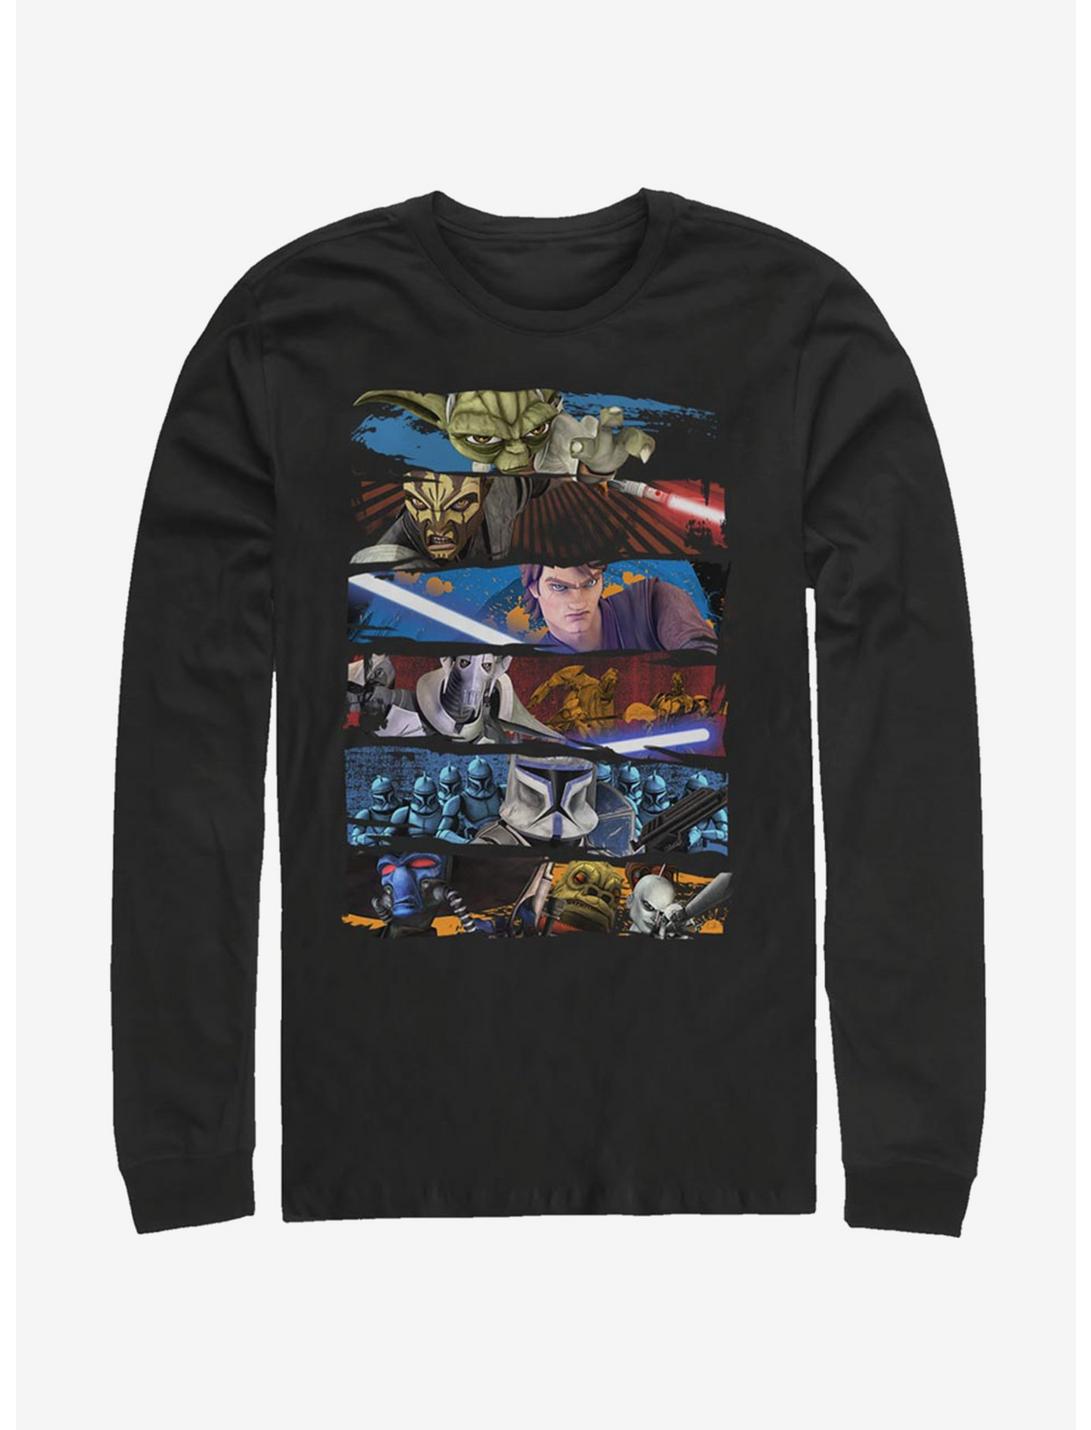 Plus Size Star Wars: The Clone Wars Face Off Long-Sleeve T-Shirt, BLACK, hi-res